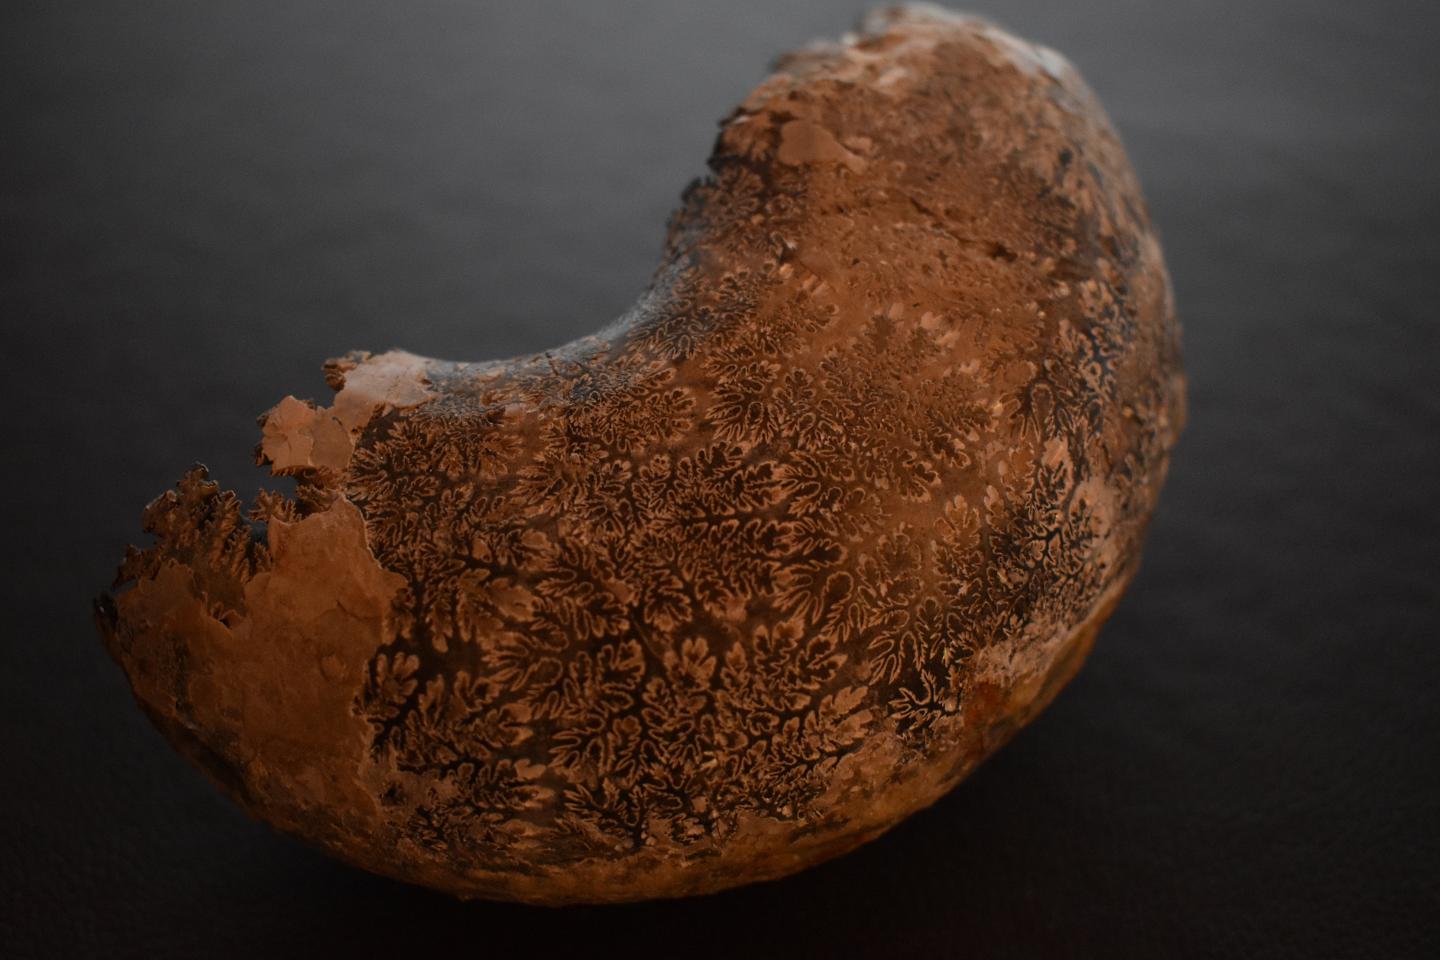 Fossil of Menuites oralensis with external shell removed to reveal intricate suture patterns.